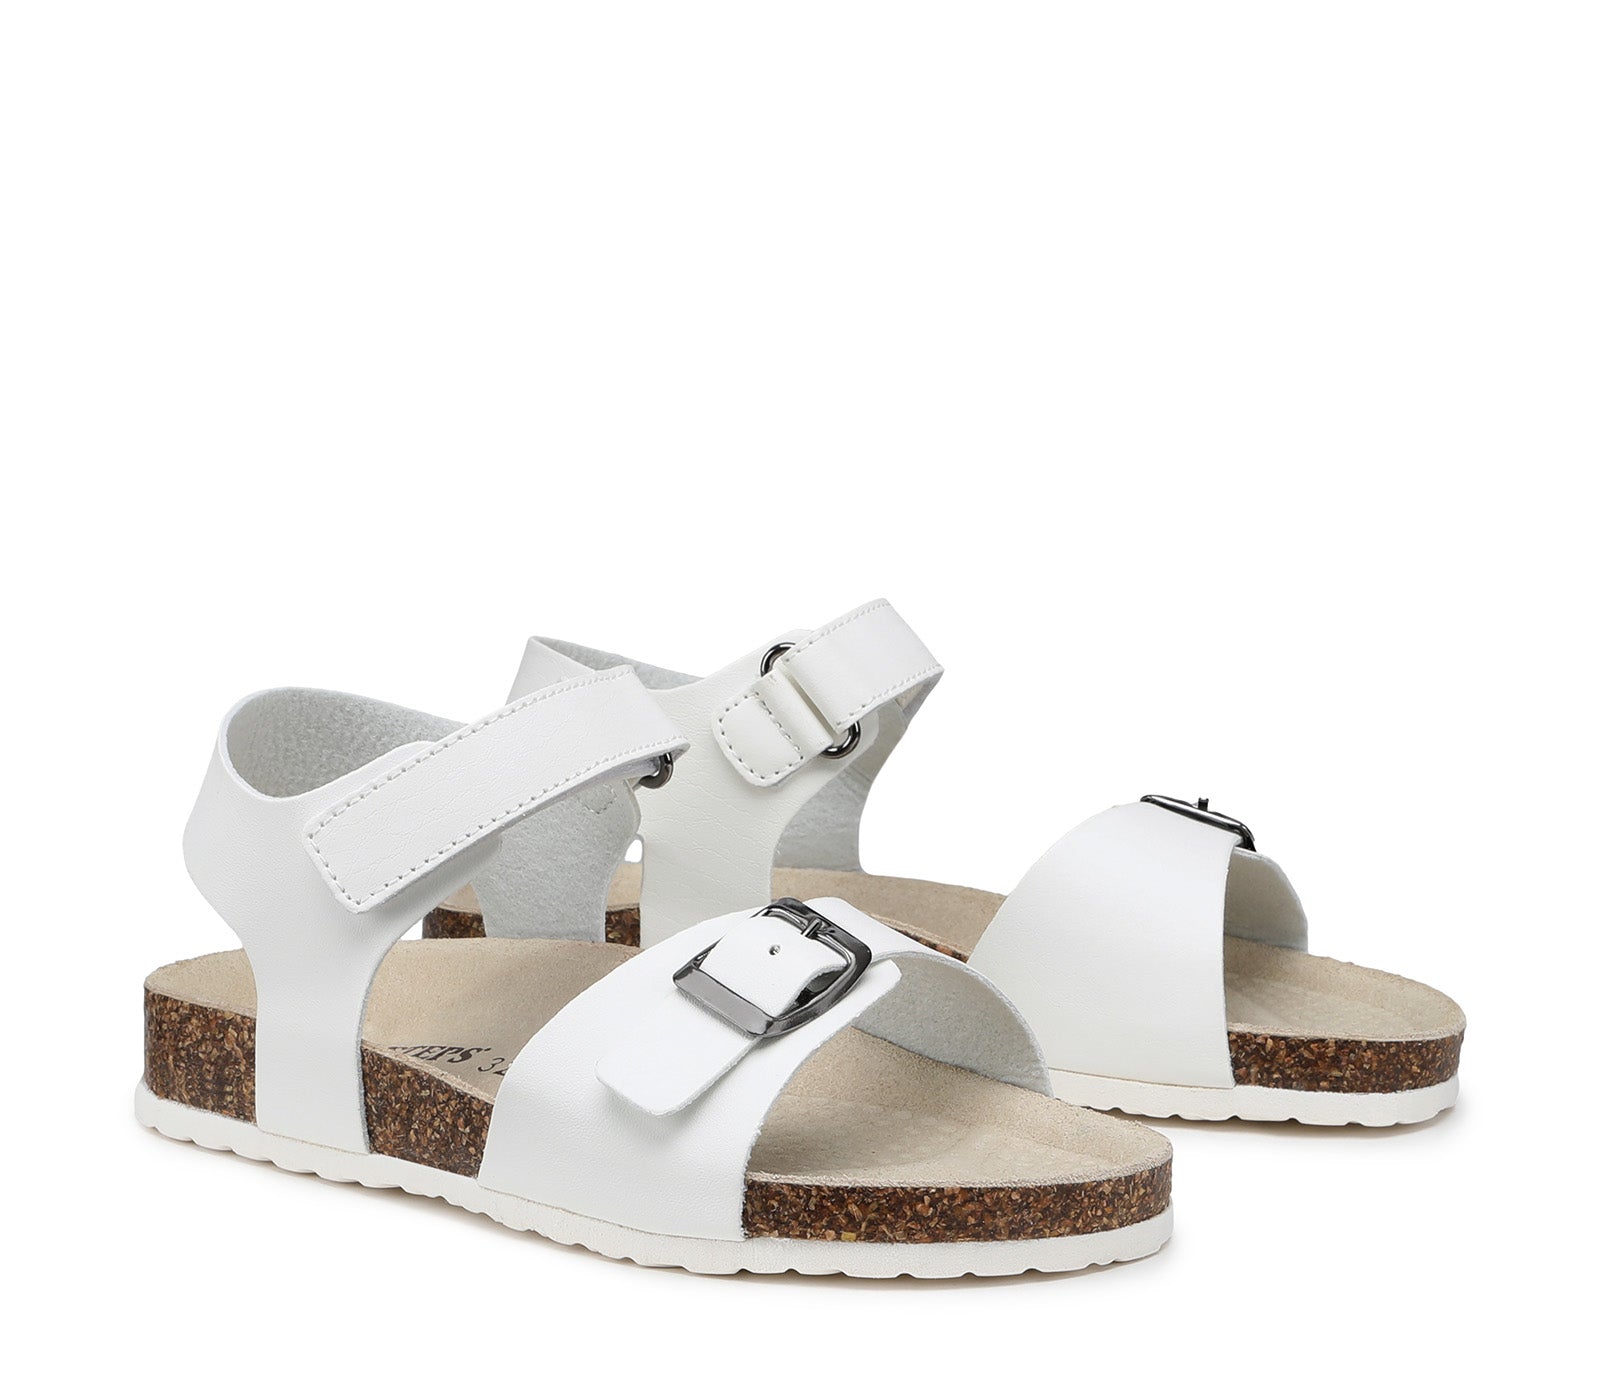 Children's White Sandals with Velcro Closure and Contoured Insole